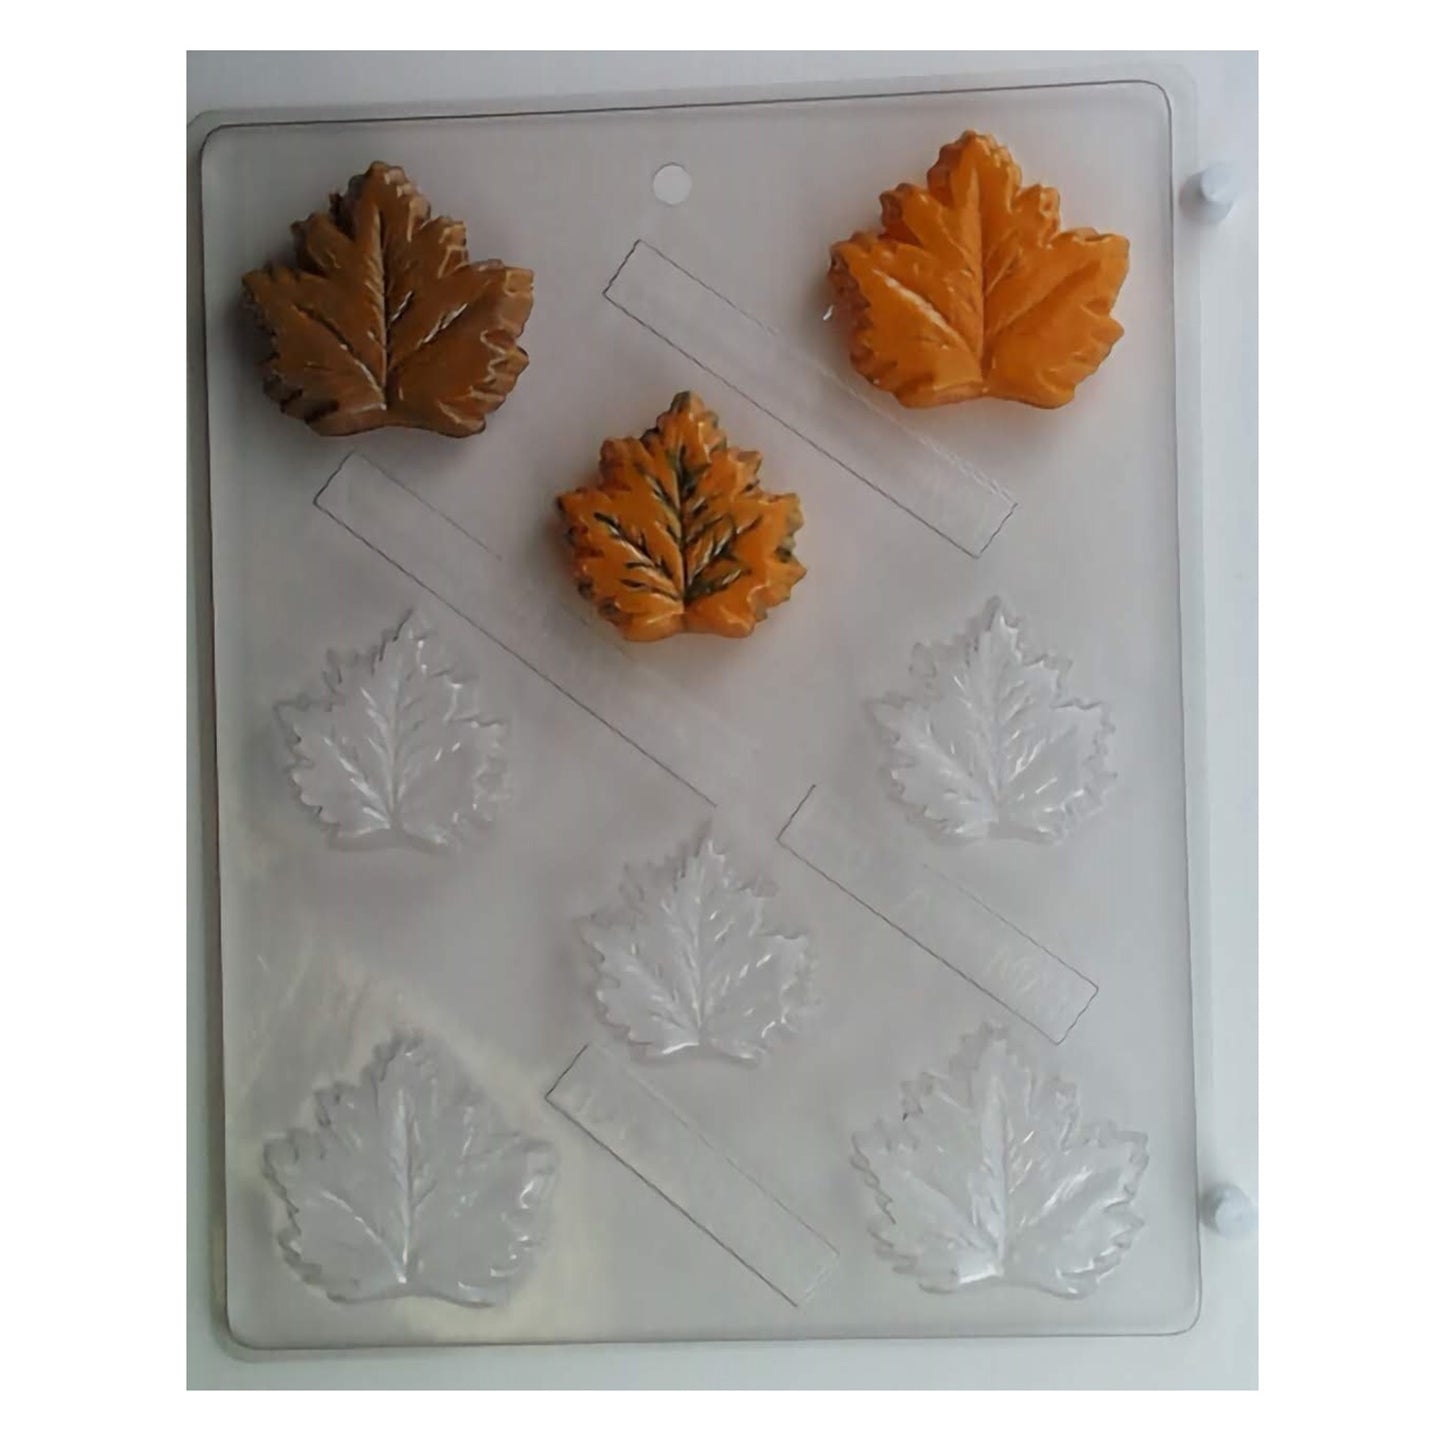 A collection of chocolate molds shaped as small, intricately veined maple and oak leaves, capturing the essence of autumn, ideal for fall-themed events or nature-inspired edible crafts.